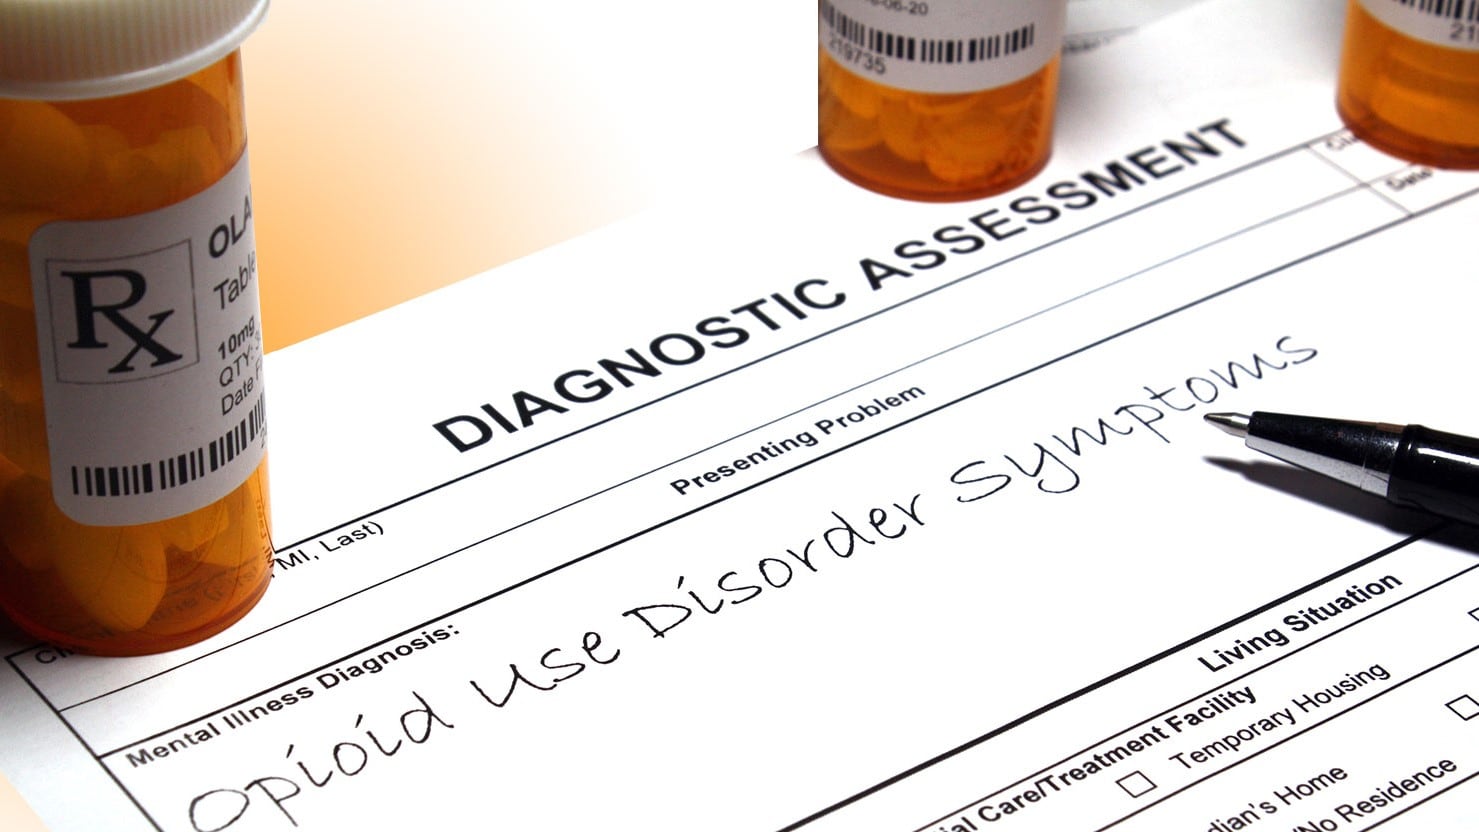 A diagnostic assessment with opioid use disorder symptoms written on it.